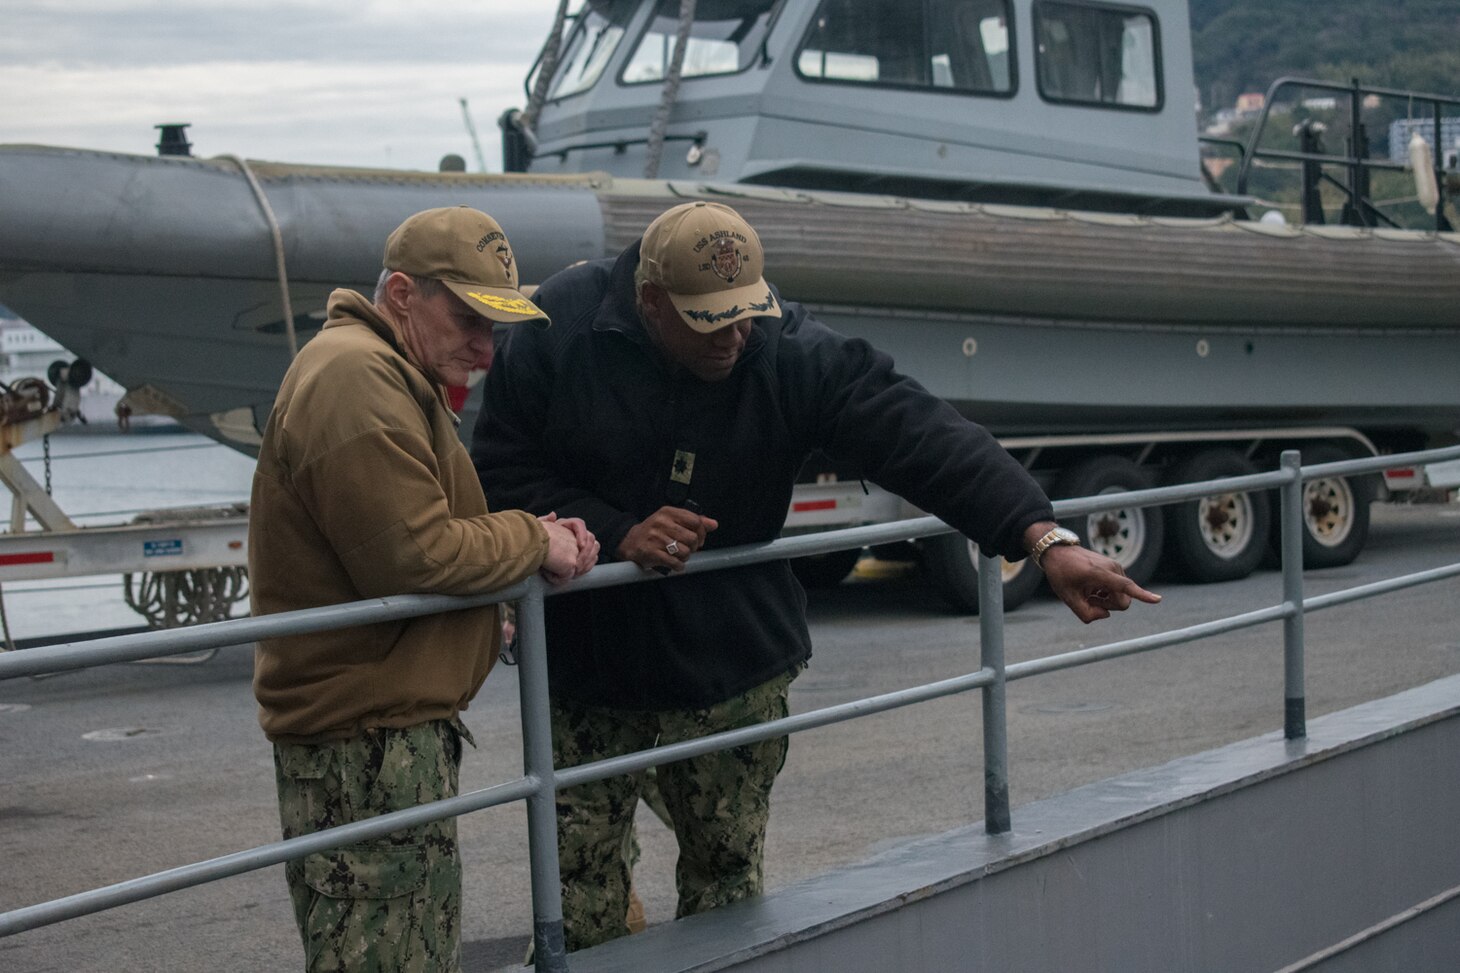 SASEBO, Japan (Jan. 9, 2019) Vice Adm. Phil Sawyer, the U.S. 7th Fleet commander, speaks with Cmdr. Patrick German, commanding officer of the amphibious dock landing ship USS Ashland (LSD 48), during a waterfront visit to forward deployed naval forces operating out of Fleet Activities Sasebo, Japan.